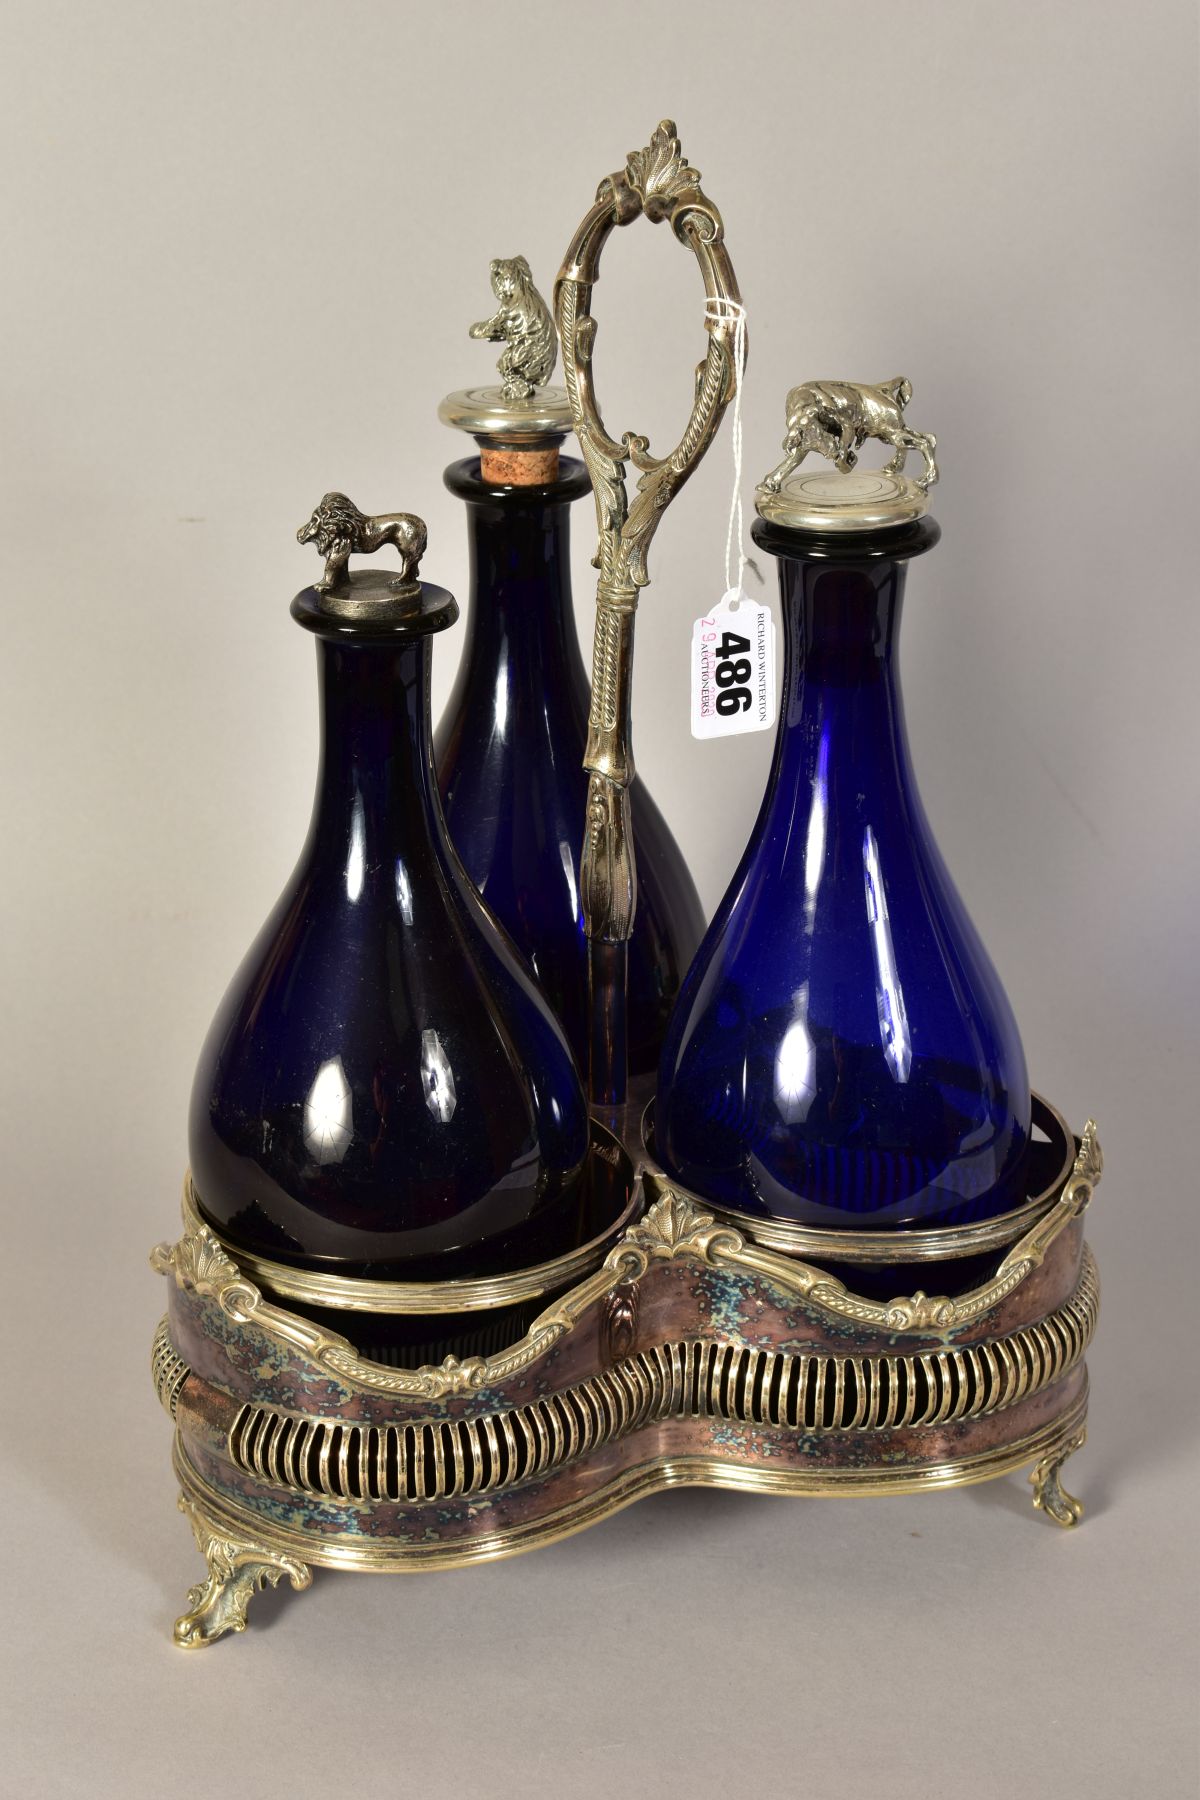 A VICTORIAN PLATED TREFOIL DECANTER STAND, containing three blue glass decanters with novelty